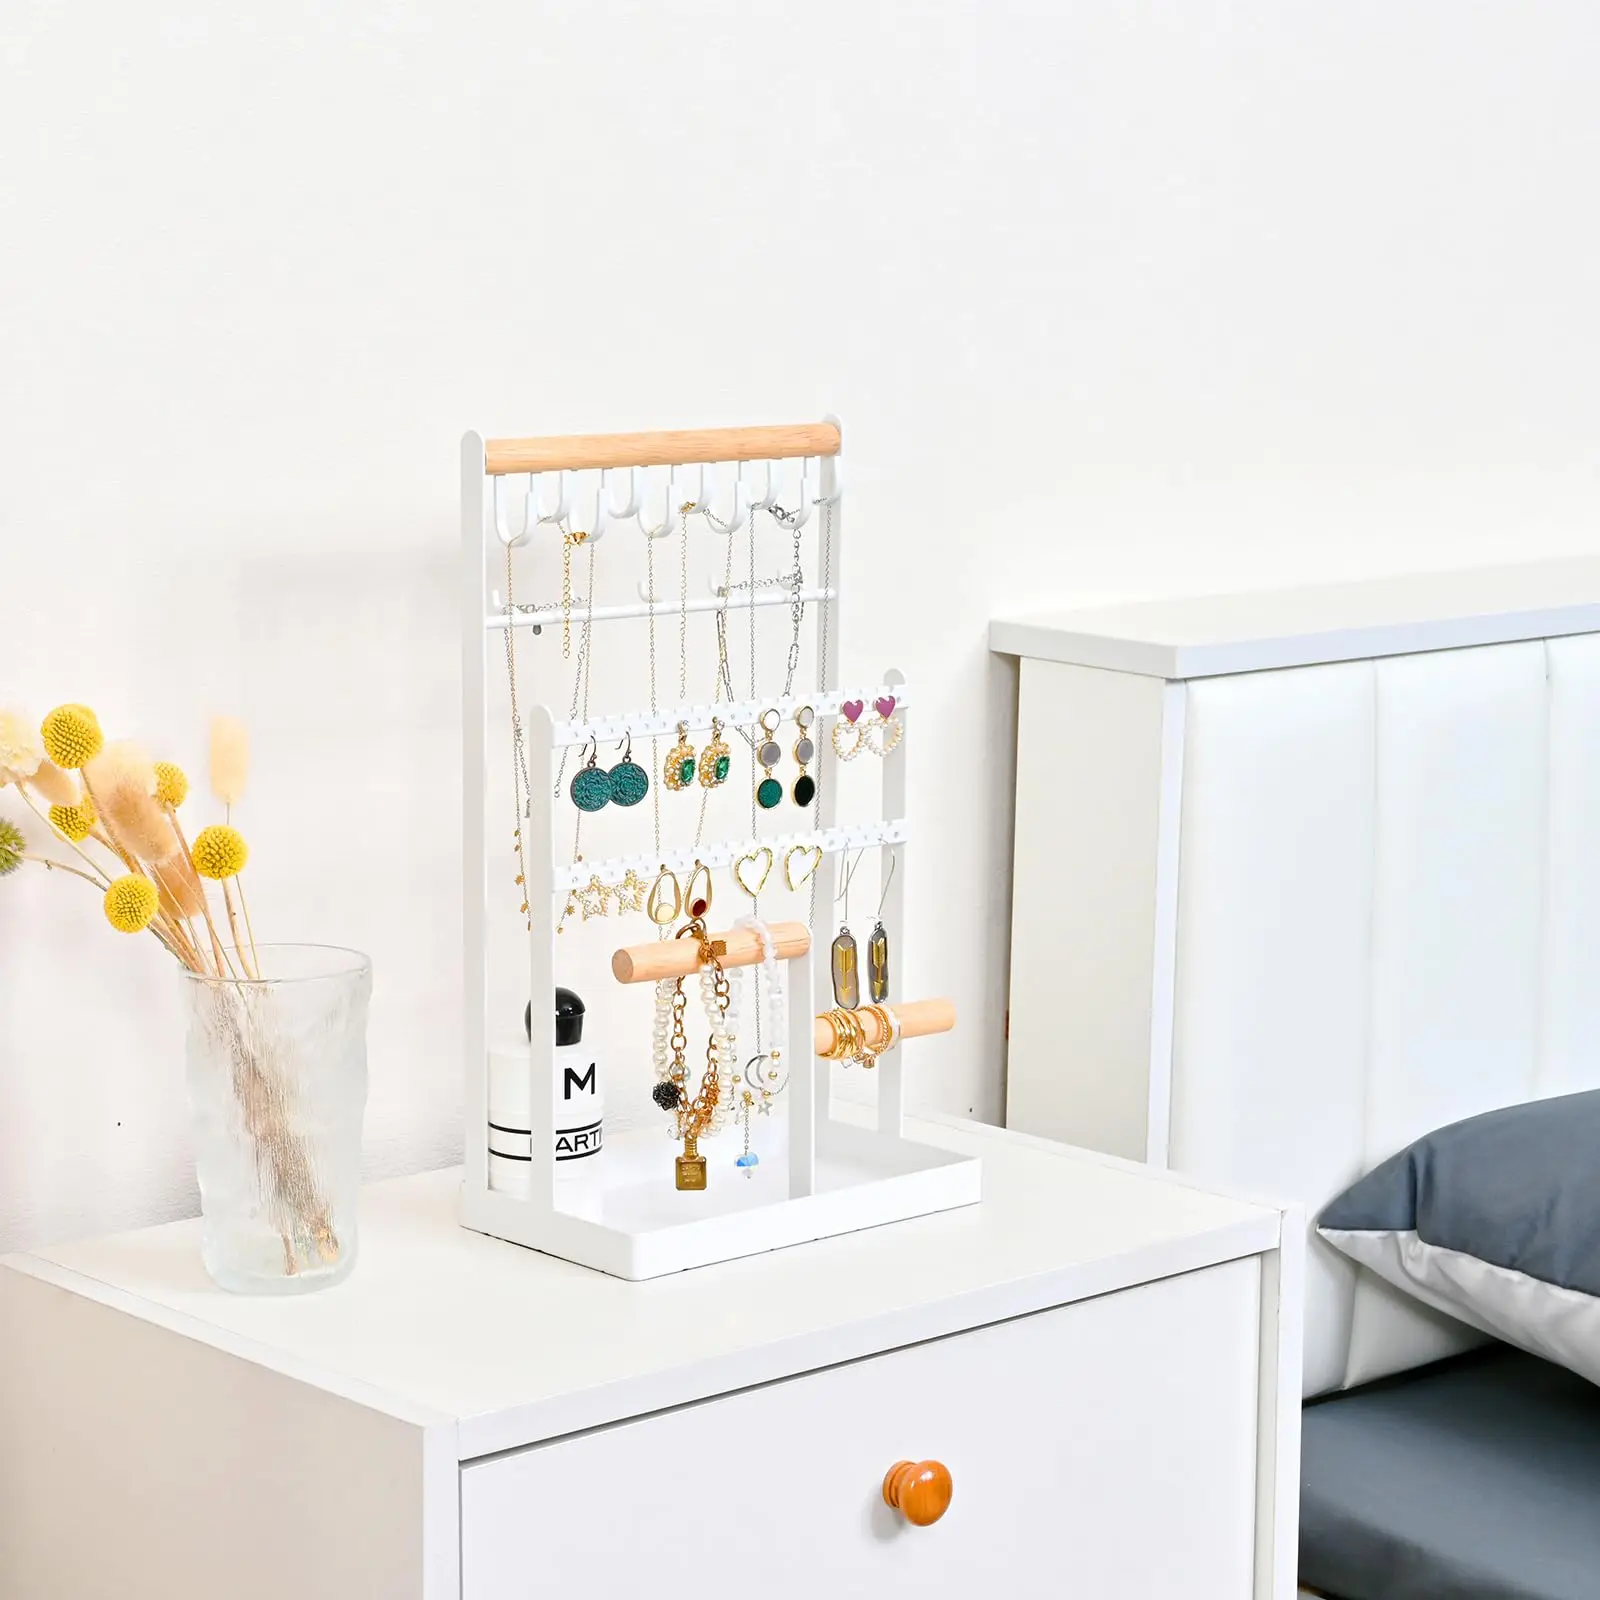 Jewelry Holder Organizer Necklace Stand  Jewelry Rack Necklace Holder with 15 Hooks and Bottom Tray